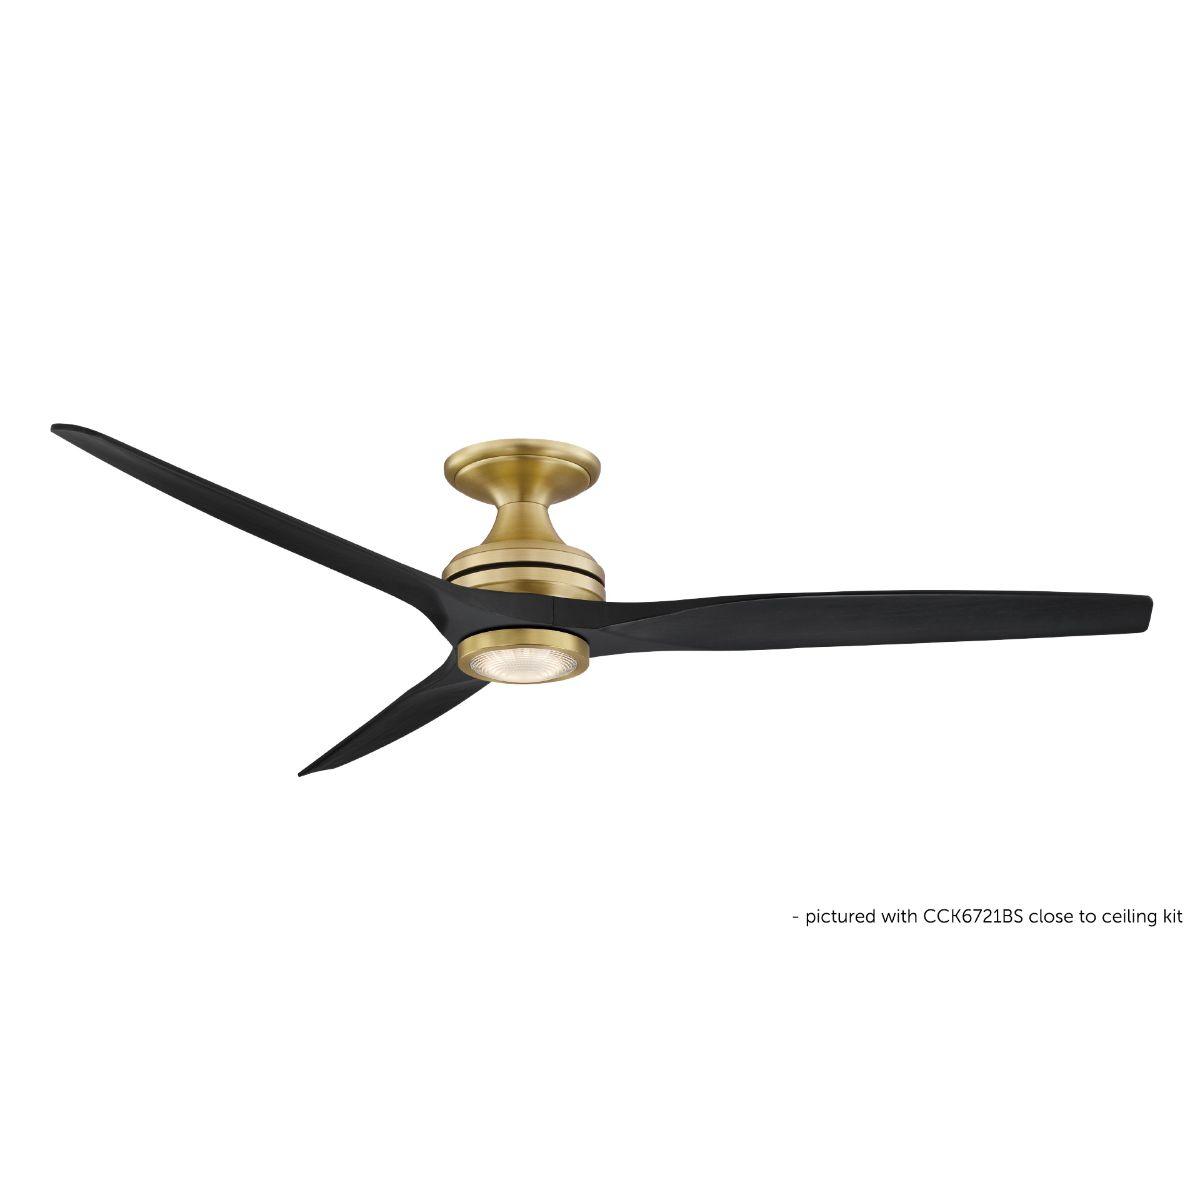 Spitfire Outdoor Ceiling Fan Motor With Remote, Set of 3 Blades Sold Separately - Bees Lighting